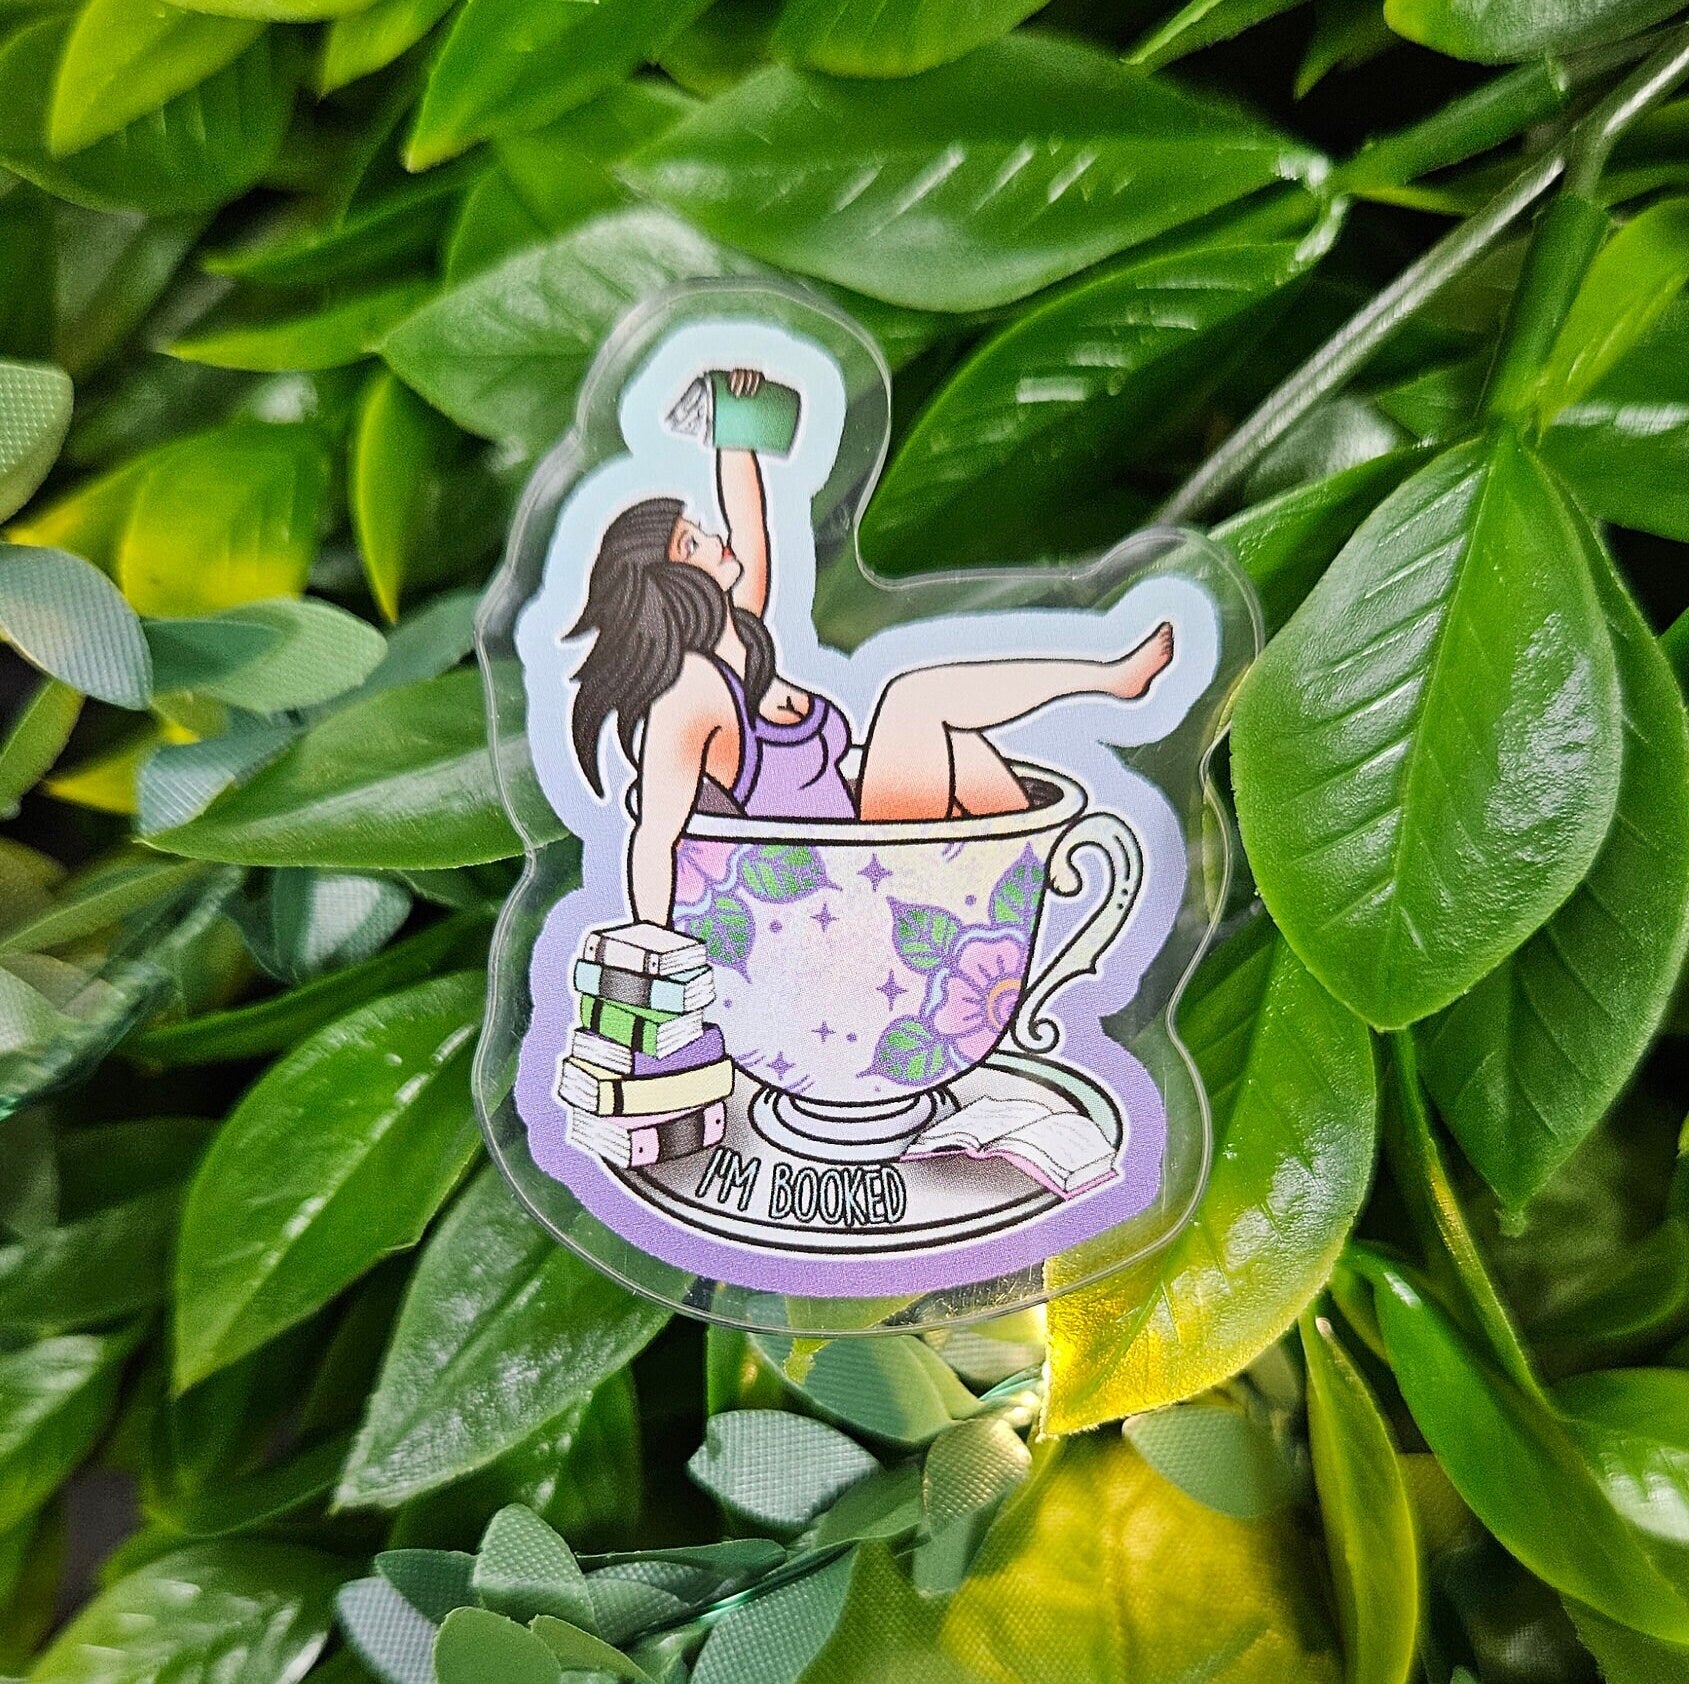 ACRYLIC PIN: I'm Booked Teacup Reader